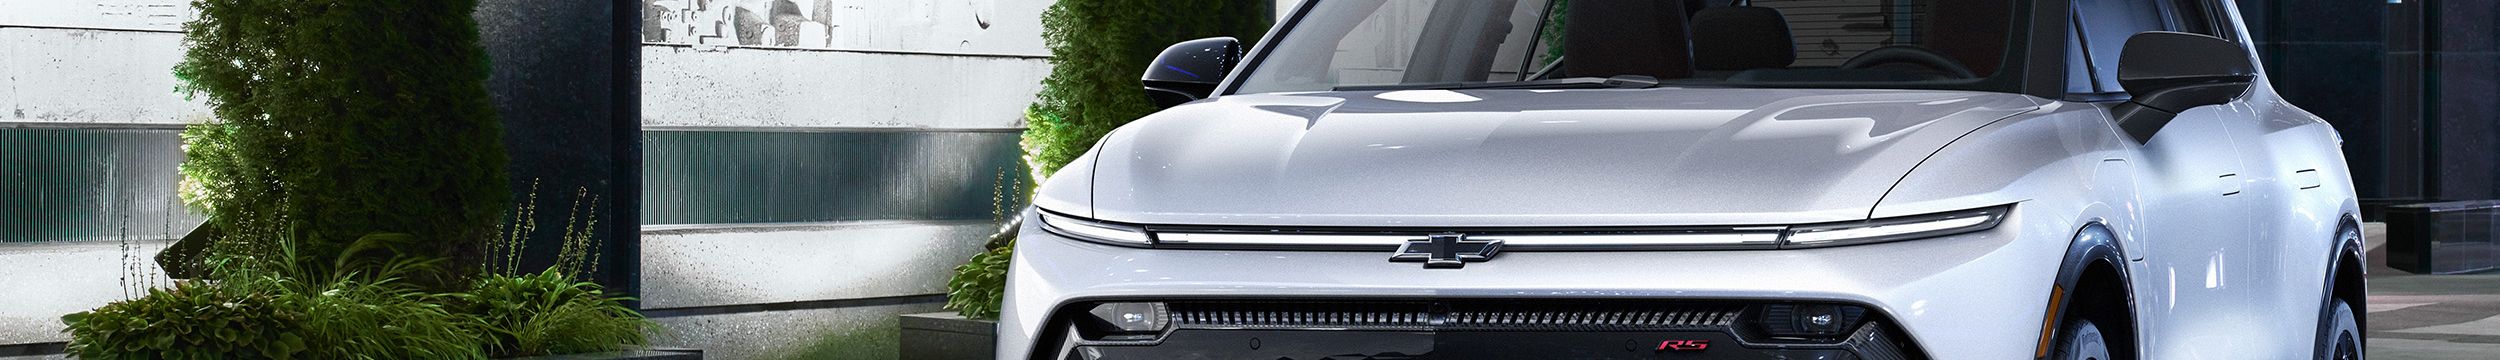 Chevrolet page header image